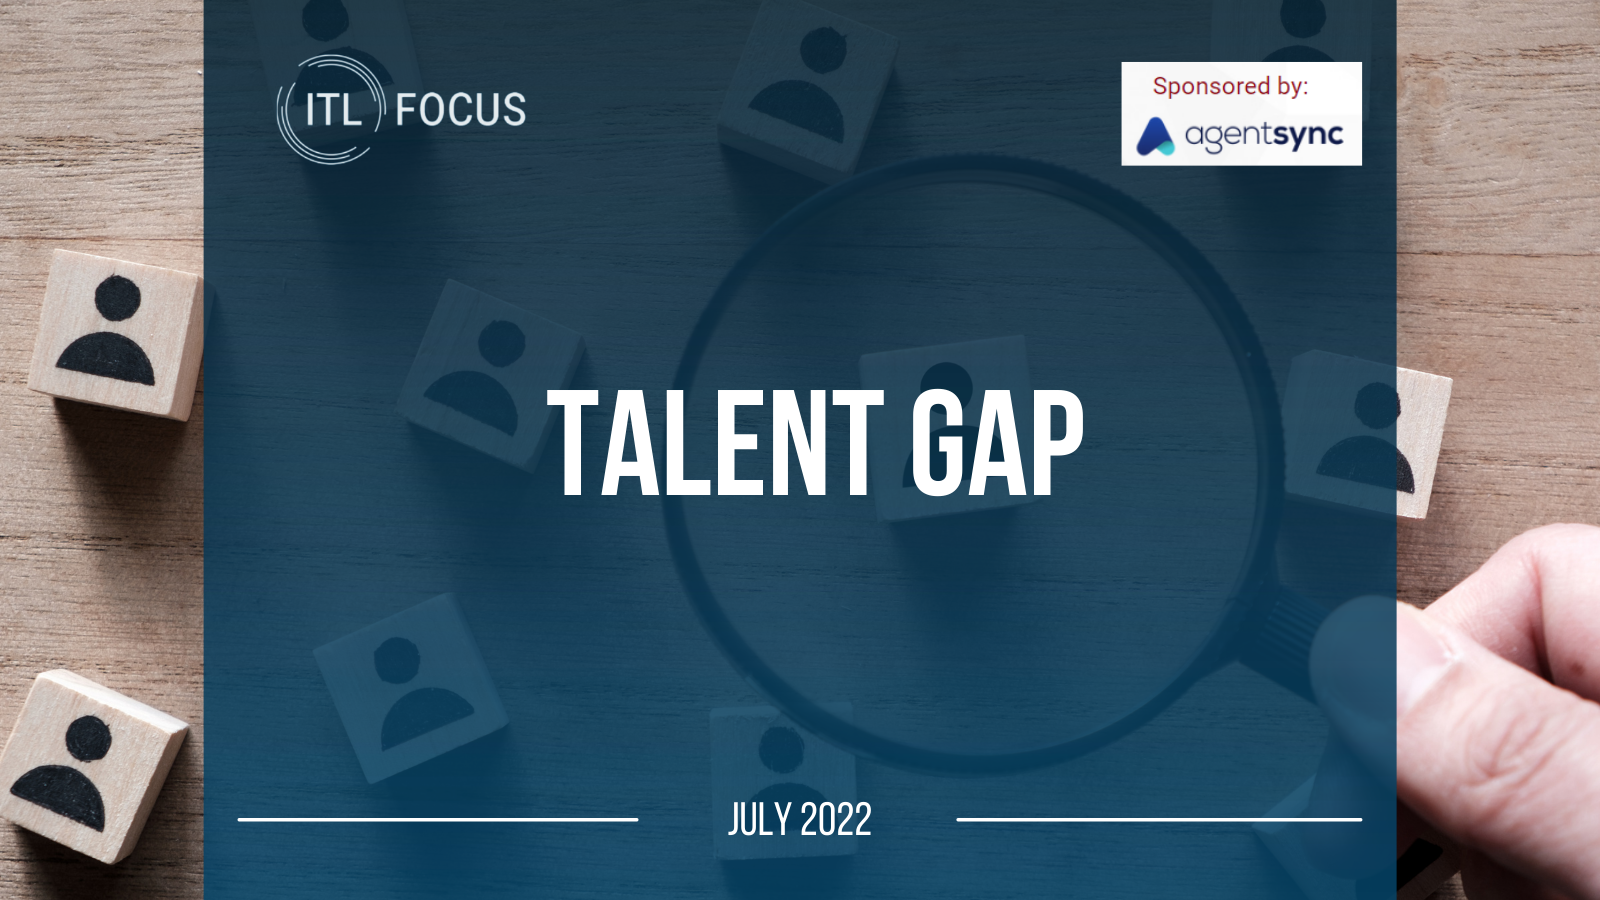 ITL Focus Image that reads "ITL FOCUS talent gap, july 2022. There si a phtoto of a hand filling out an insurance claims form on a clipboard next to a calculator 